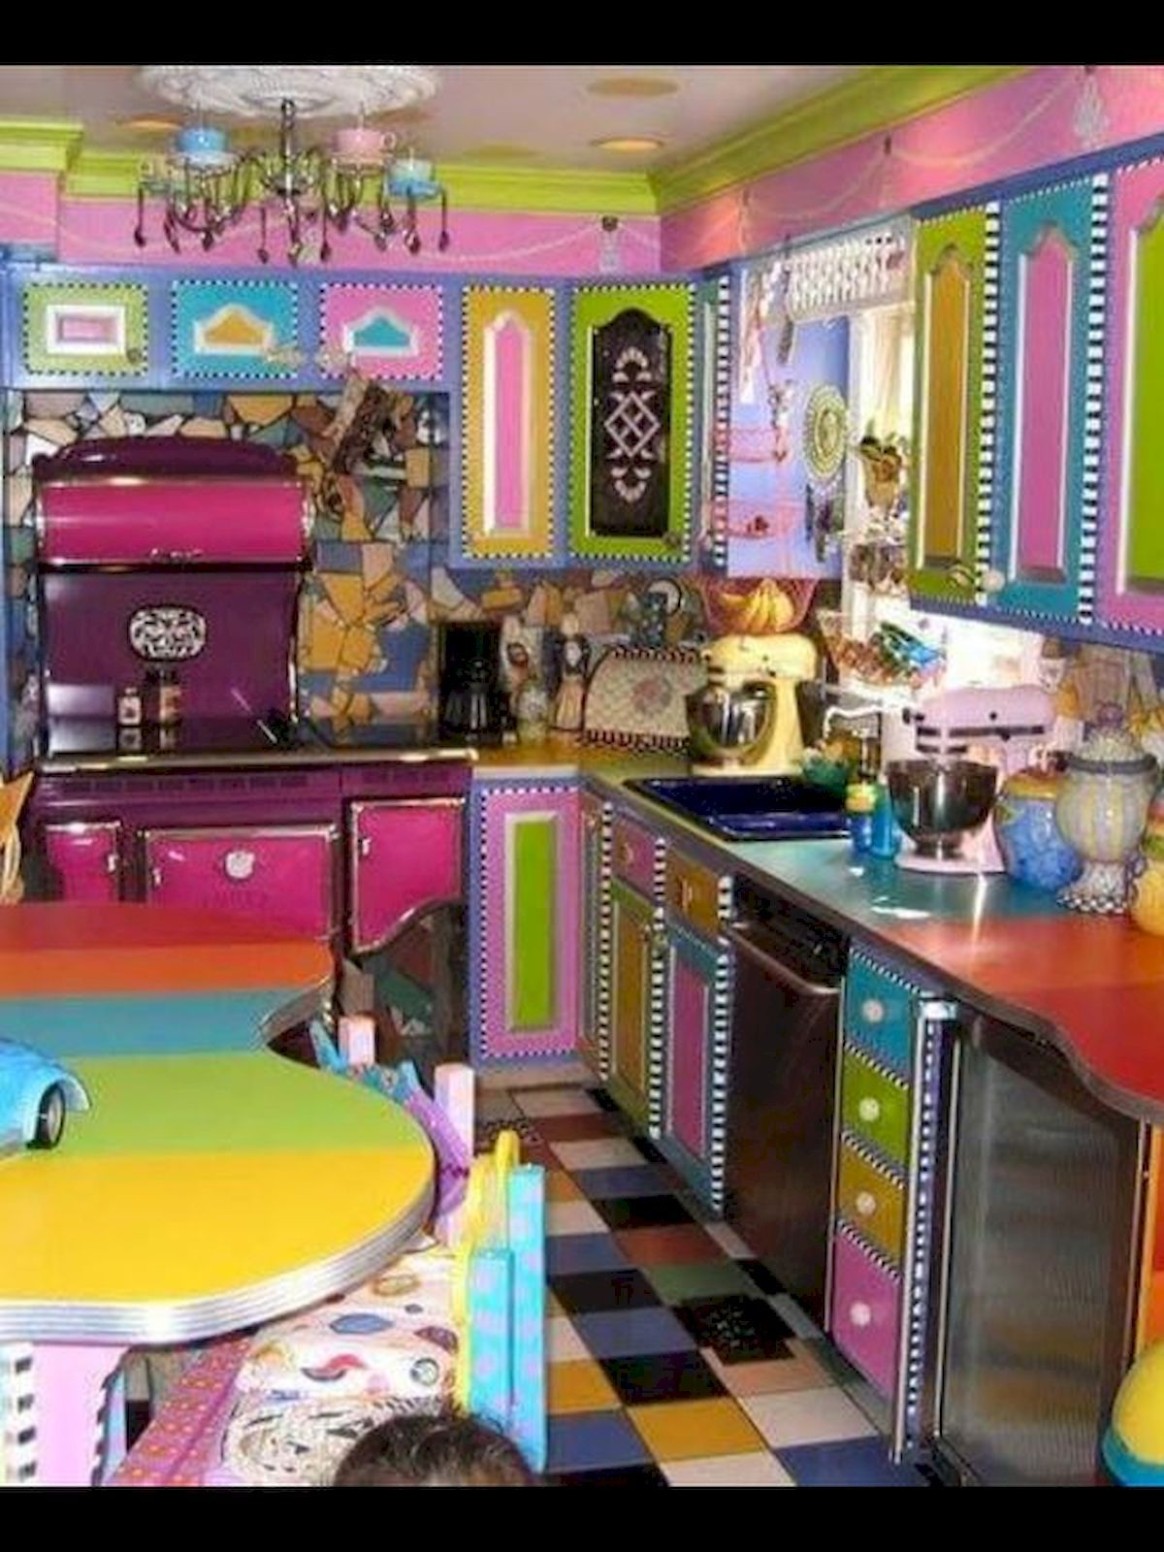 7 Amazing Kitchen Remodel and Decor Ideas With Colorful Design  - funky kitchen ideas